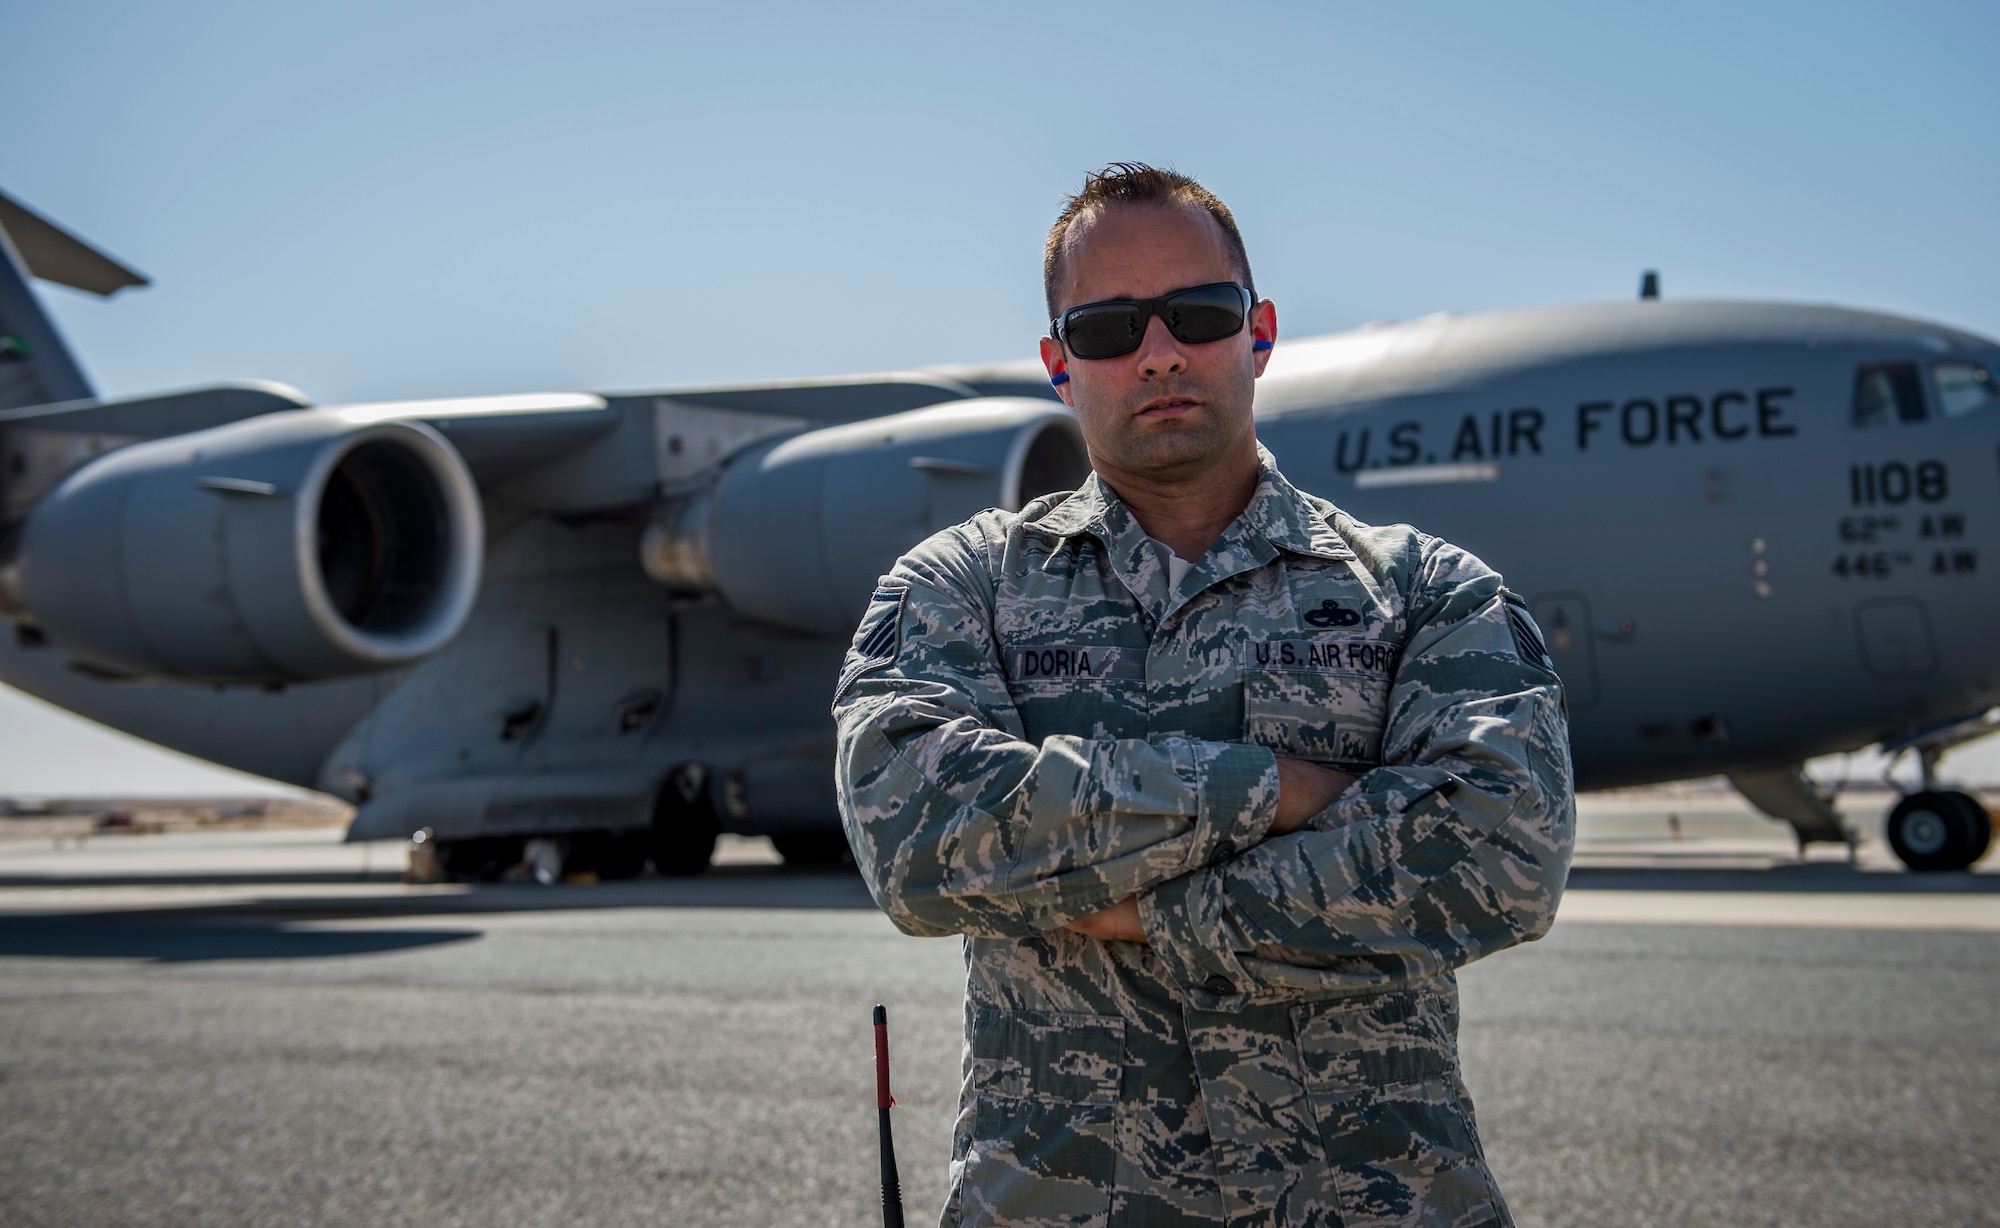 This week's Rock Solid Warrior is Master Sgt. Vincent Doria. He is the lead production superintendent with the 386th Expeditionary Maintenance Squadron. The Long Island, New York native is deployed from the 35th Aircraft Maintenance Squadron, Misawa Air Base, Japan.